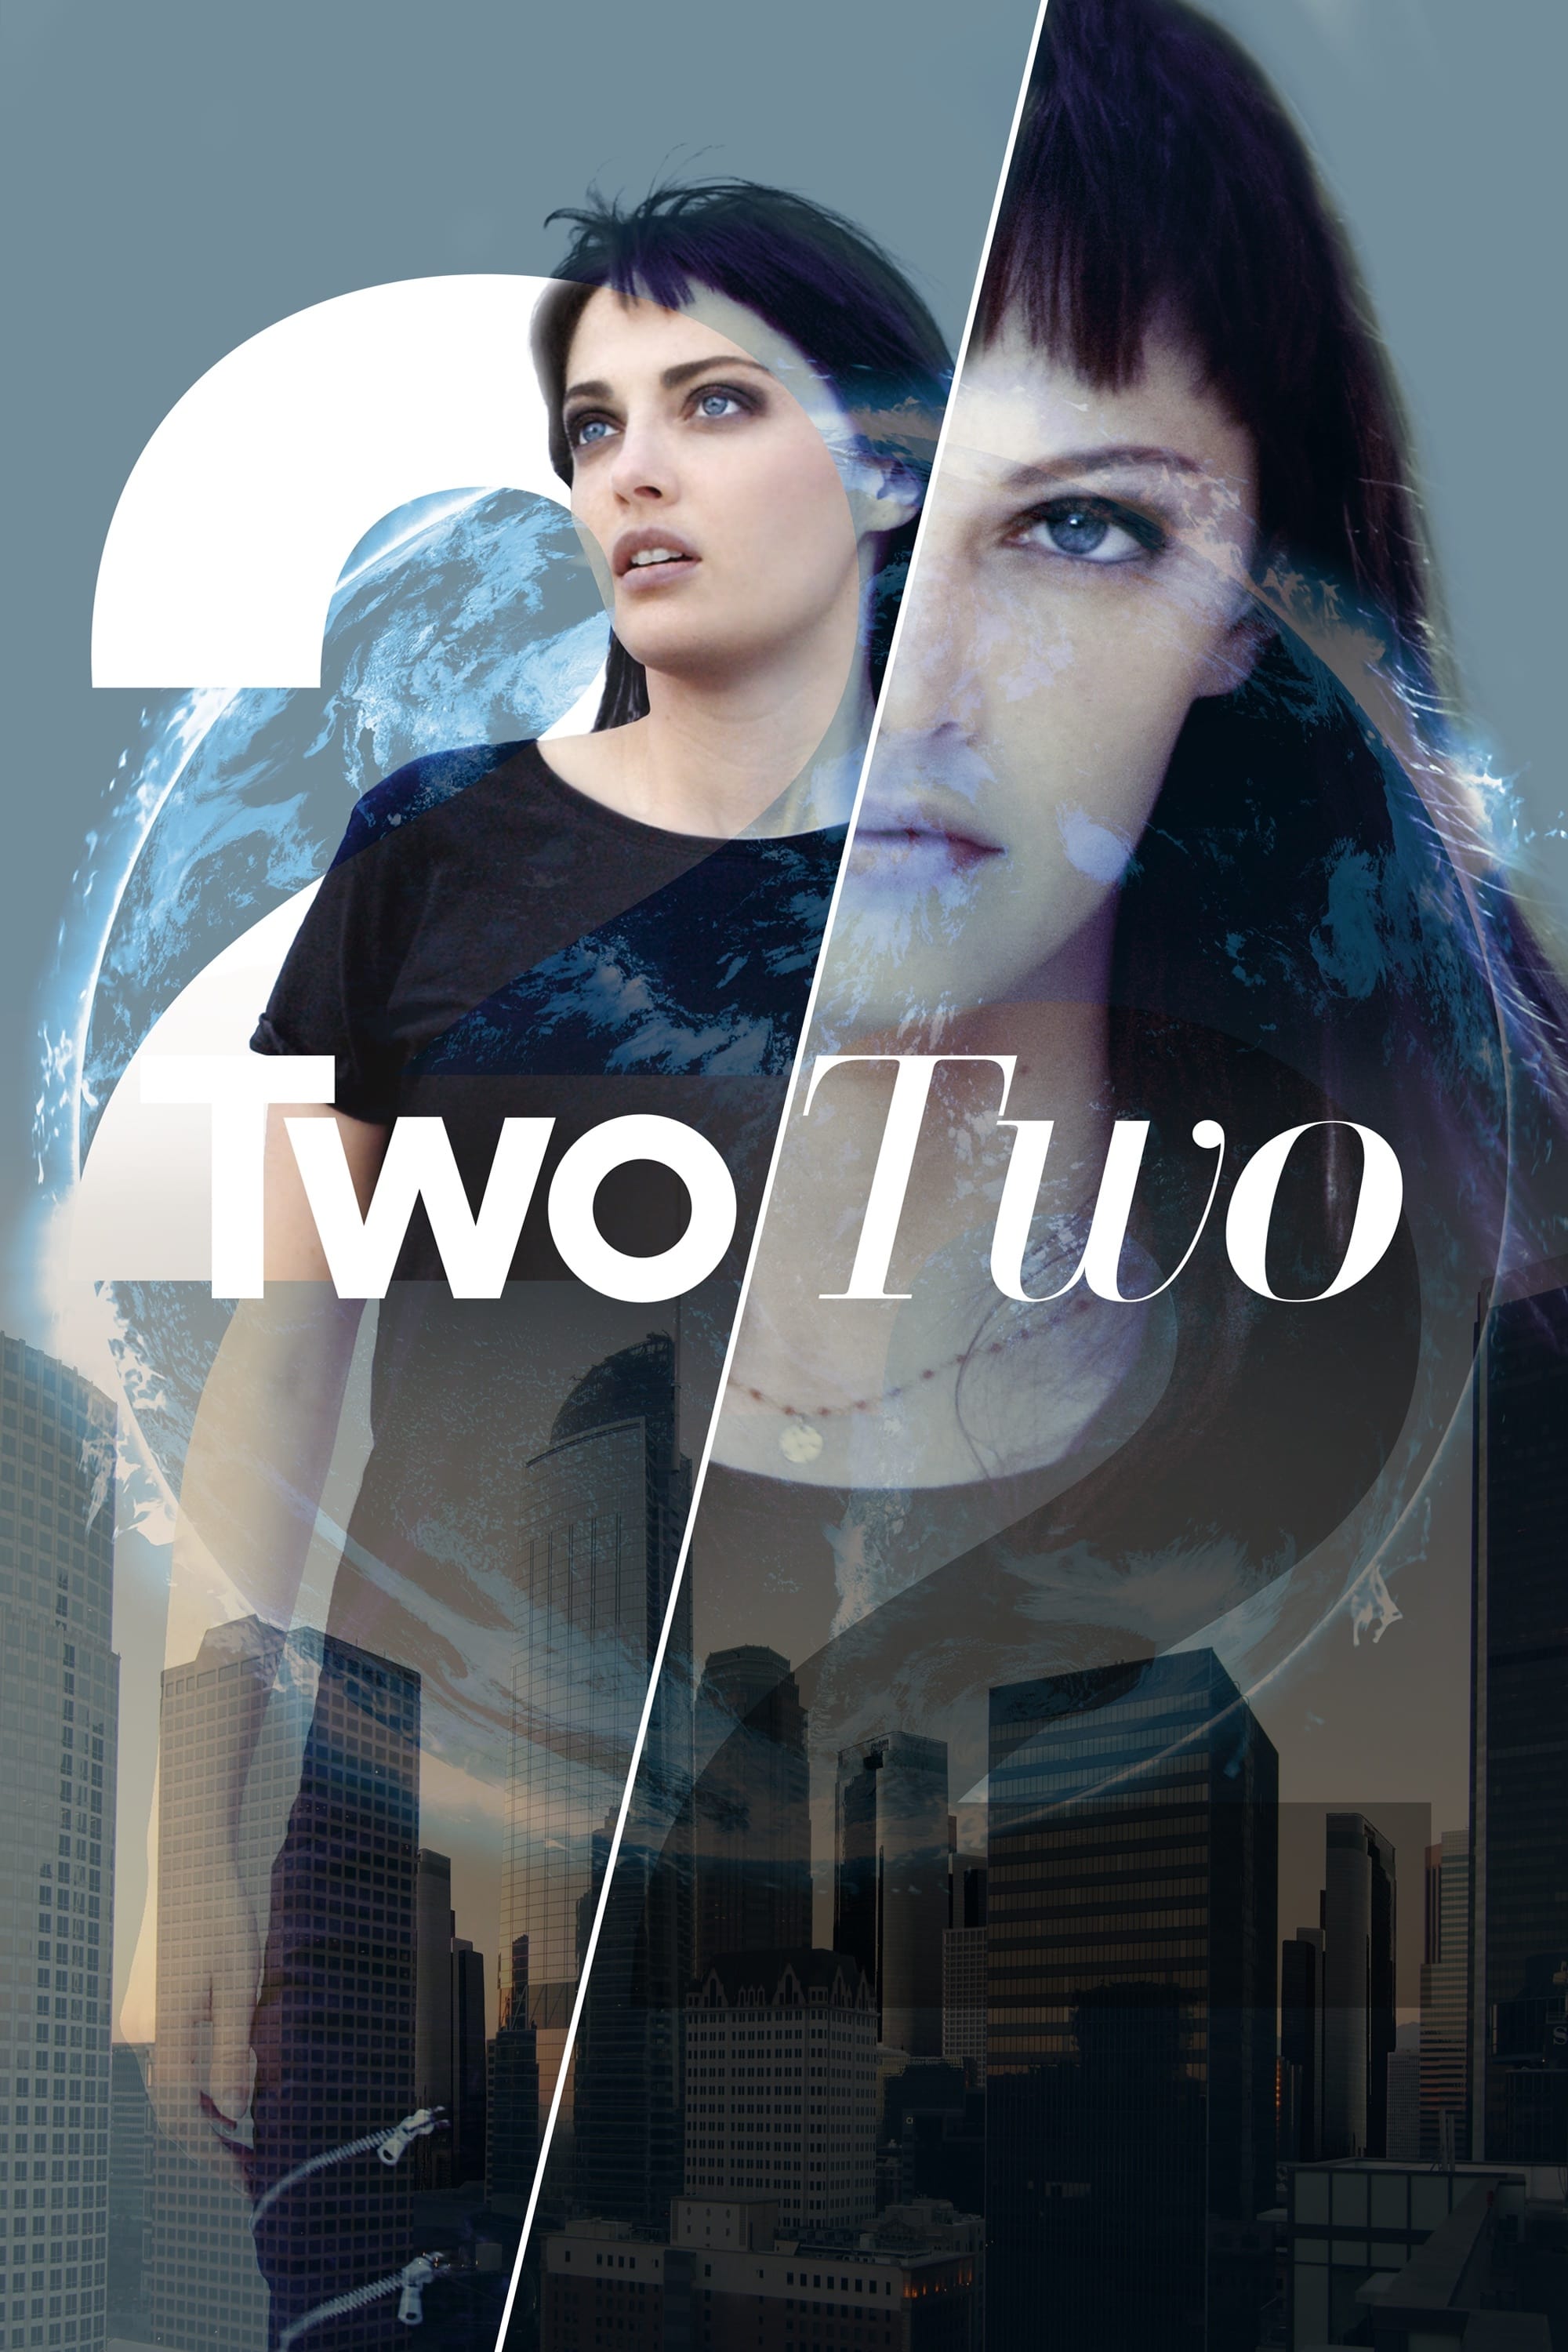 TwoTwo film